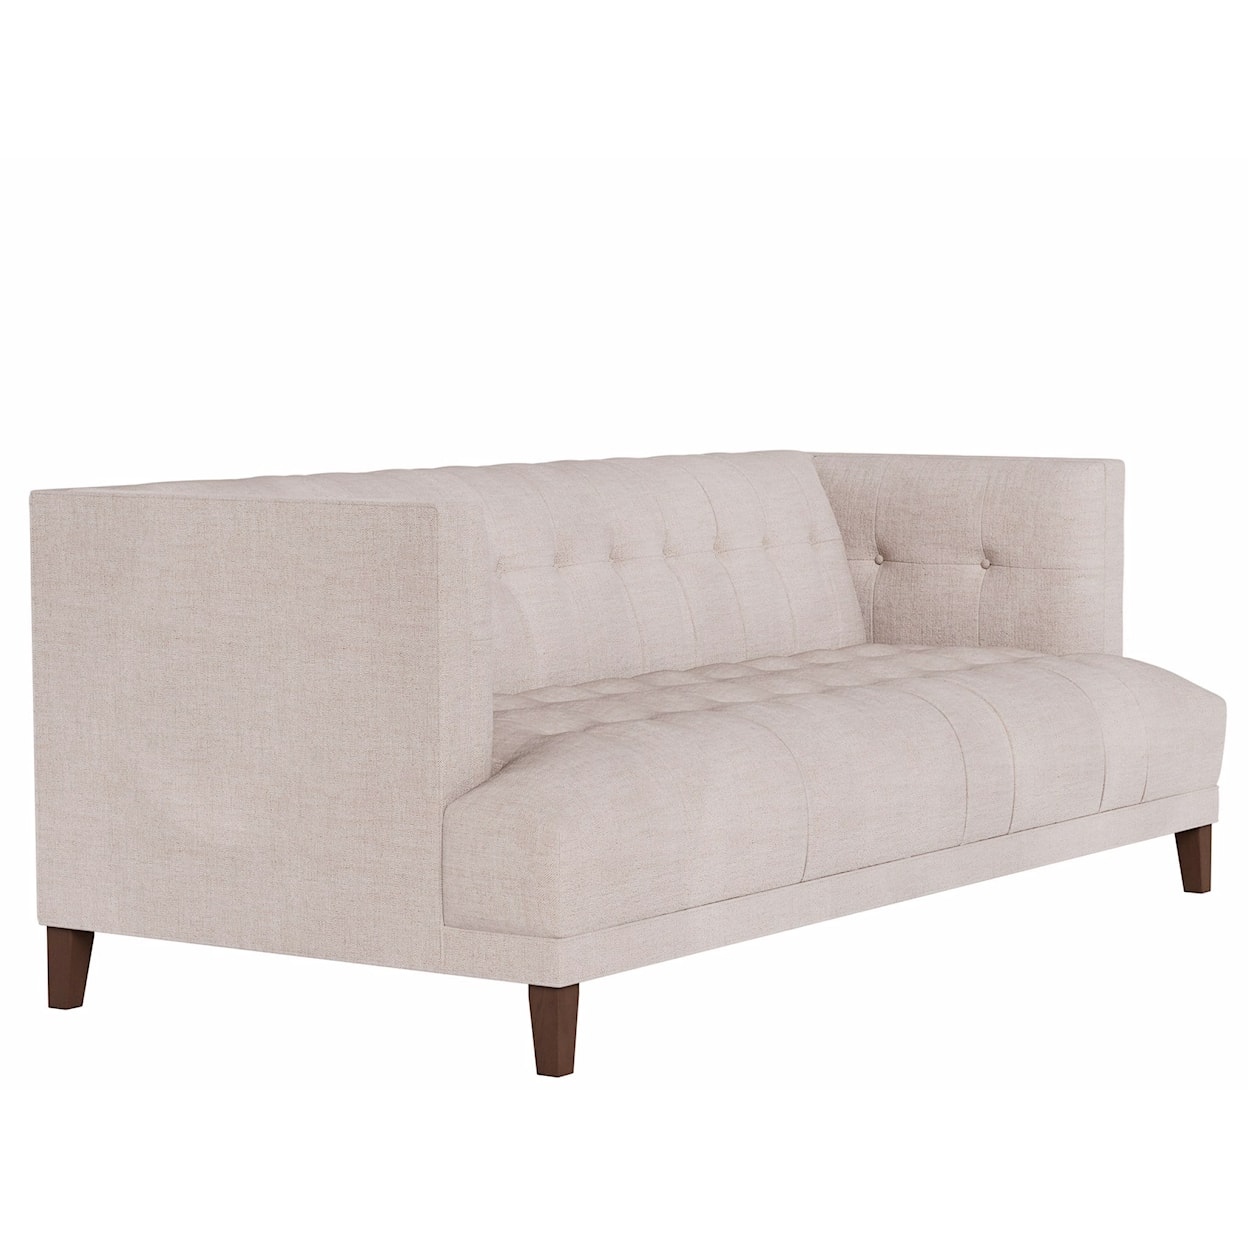 Universal Special Order Paxton Sofa -Special Order